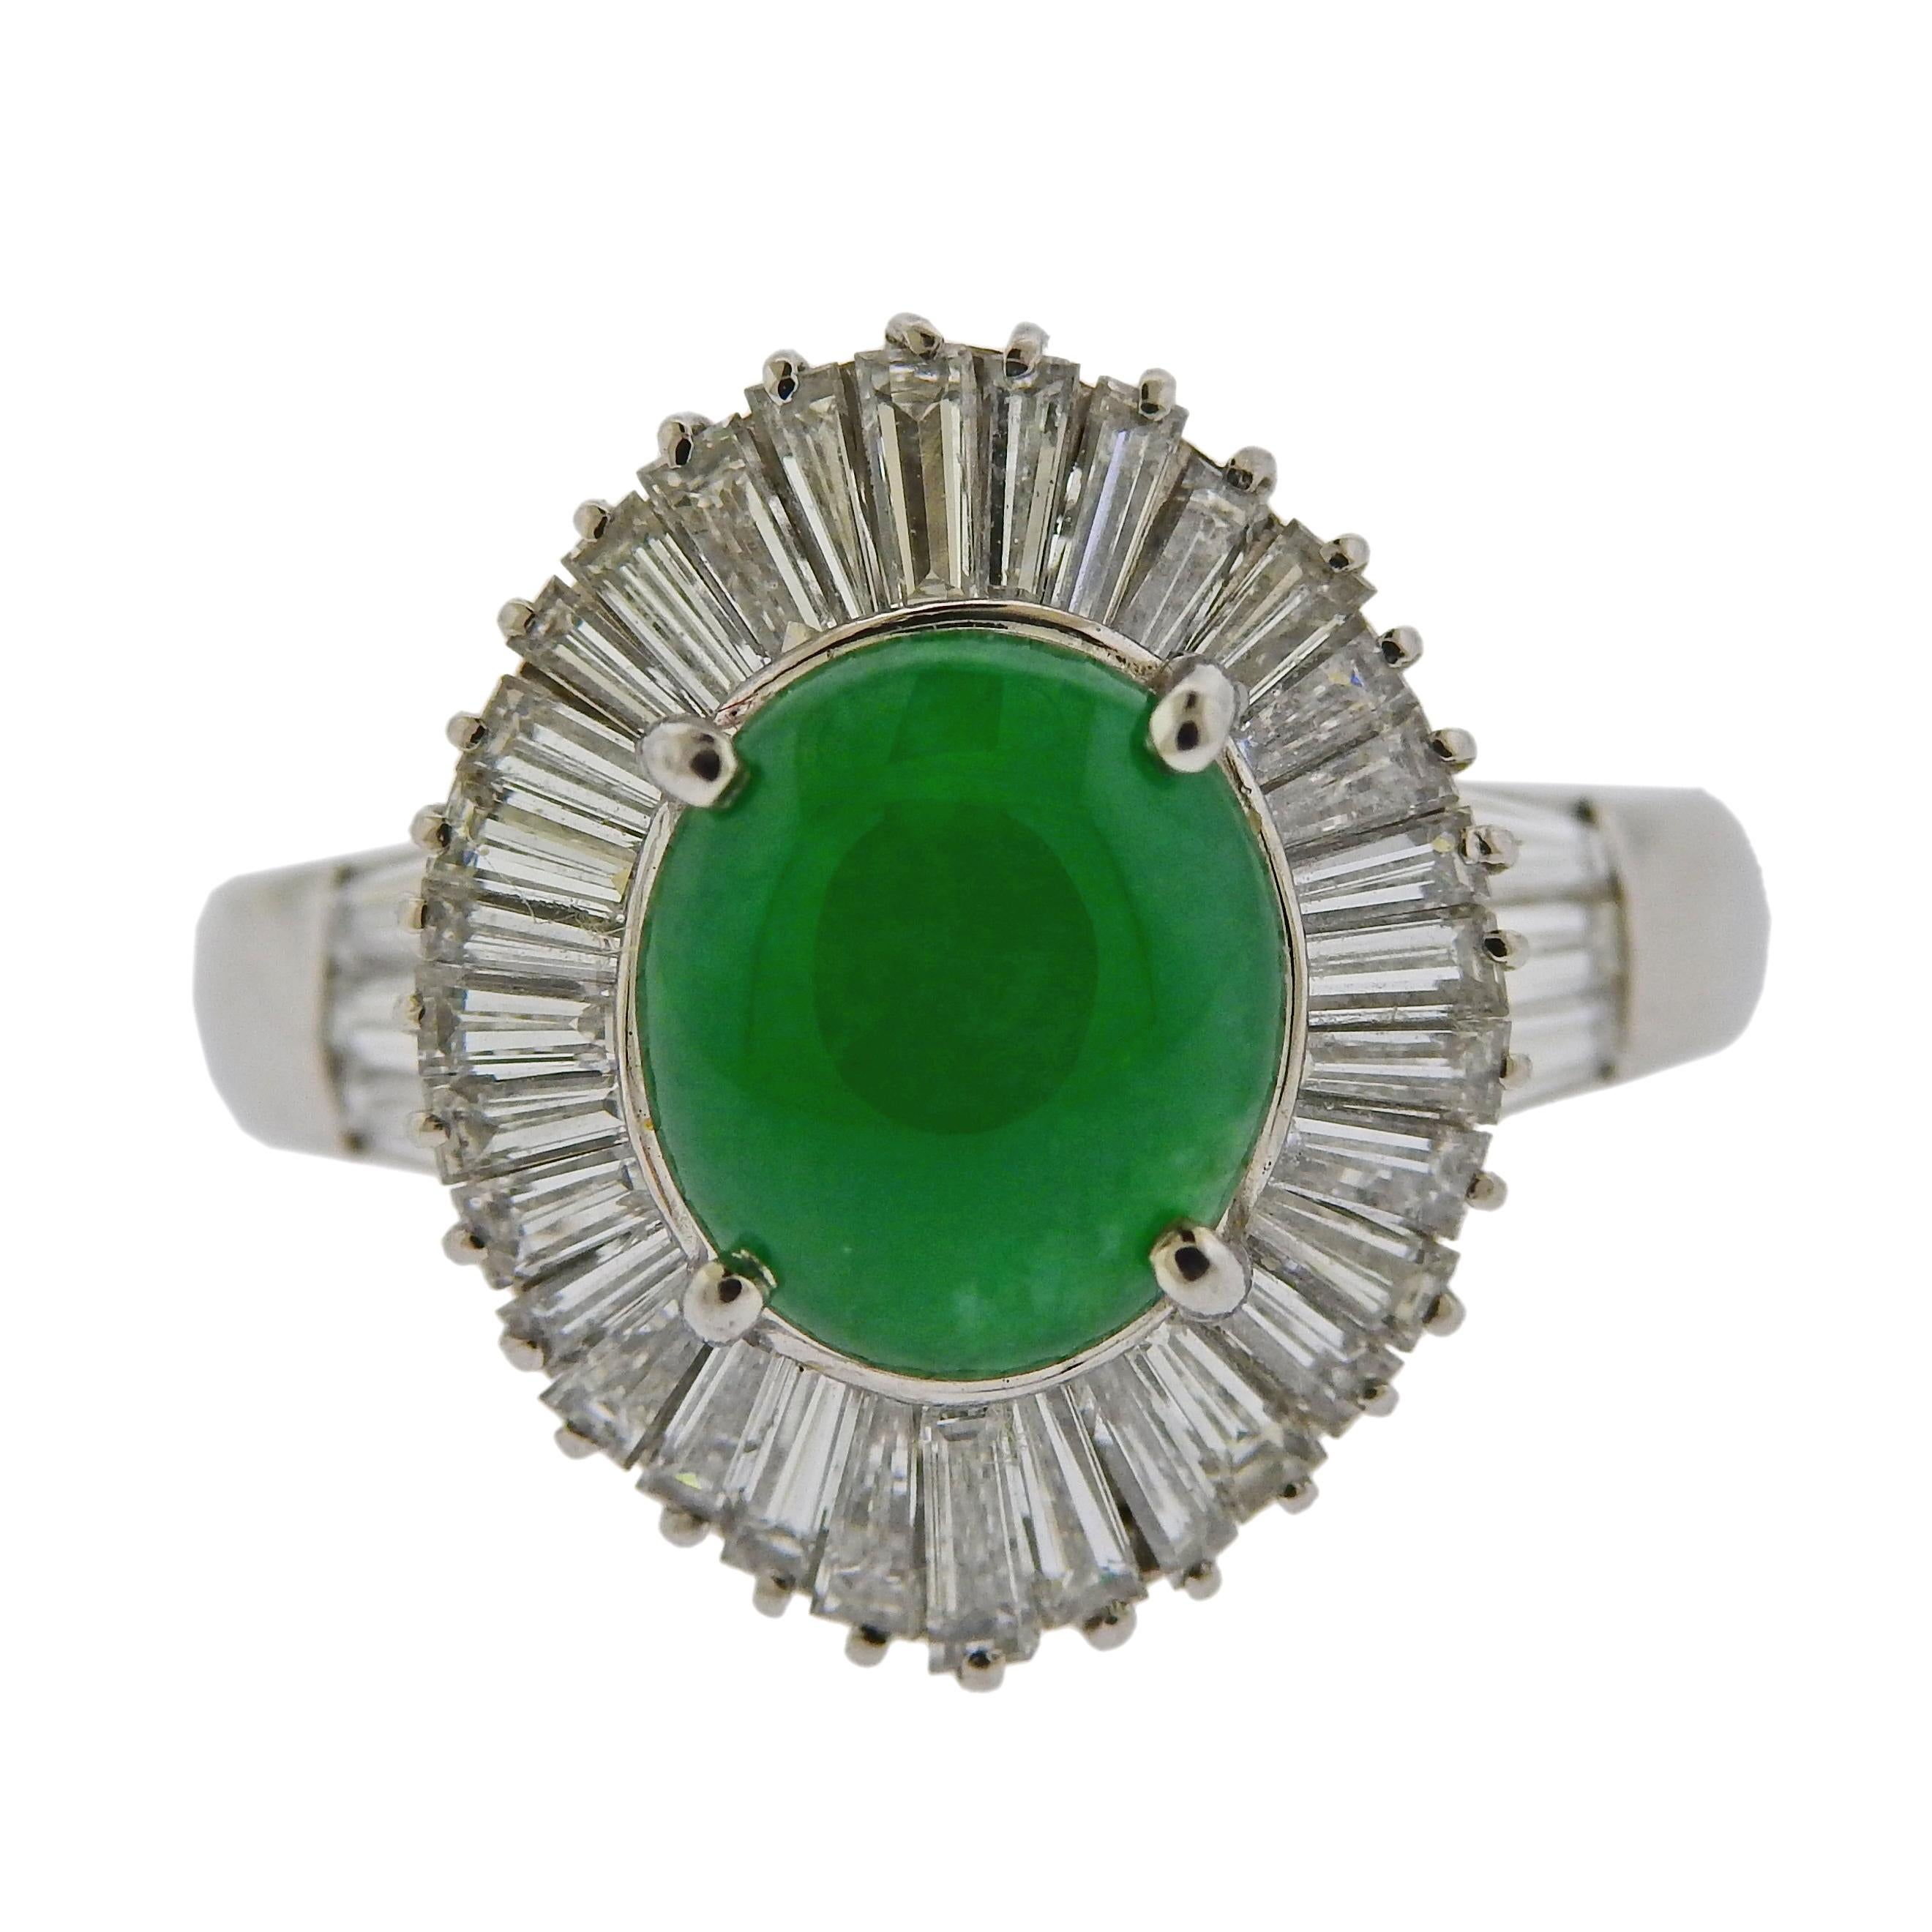 Platinum cocktail ring with 2.76ct oval jade, surrounded with 1.63ctw in VS-SI1/H diamonds. Ring size - 5.75, ring top - 18mm x 15mm. Weight is 8.3 grams. Marked: 2.76, D1.68, Pt900. 